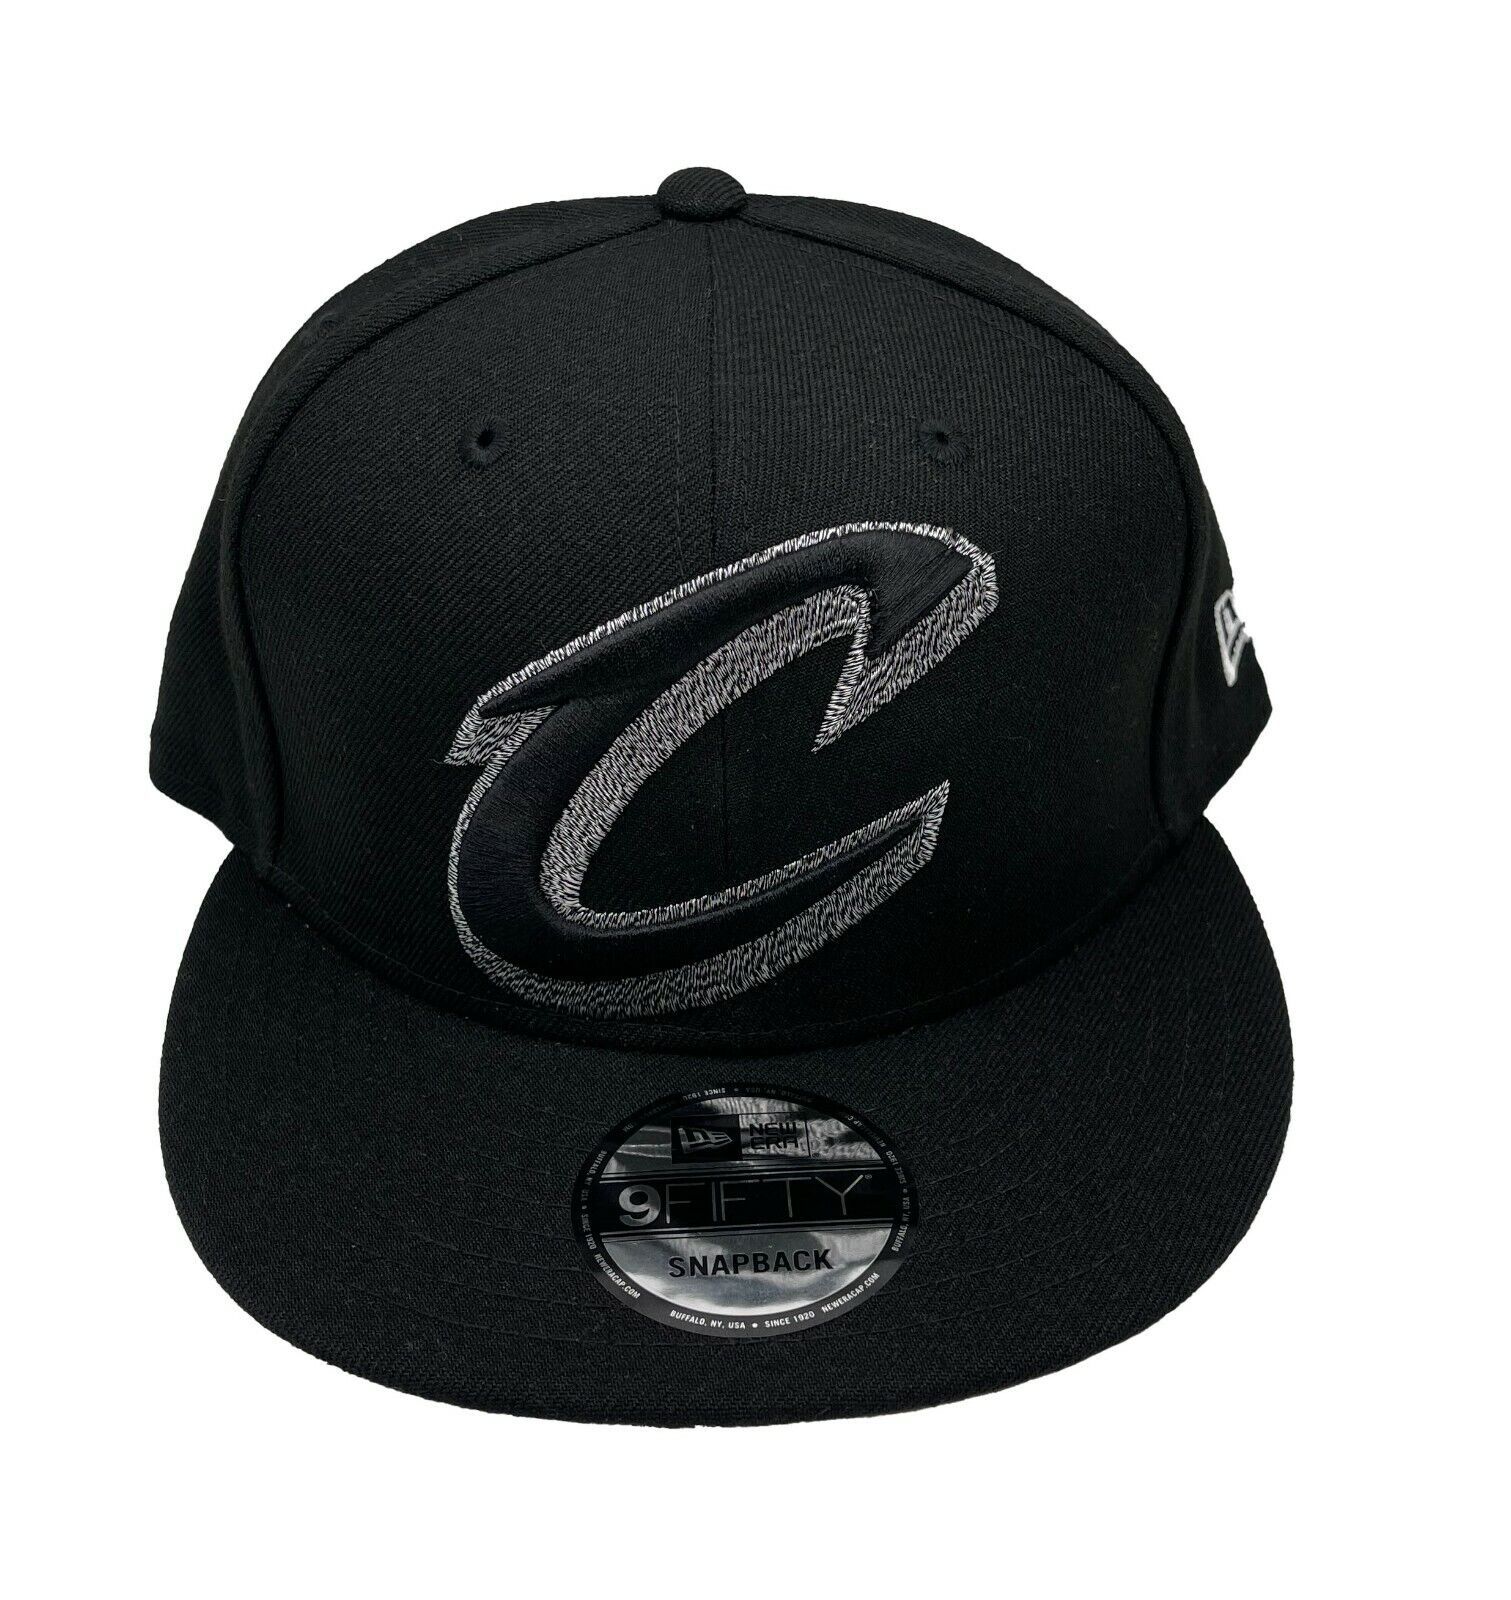 Primary image for Cleveland Cavaliers New Era 9Fifty Black Squad Twist Snapback Hat Cap